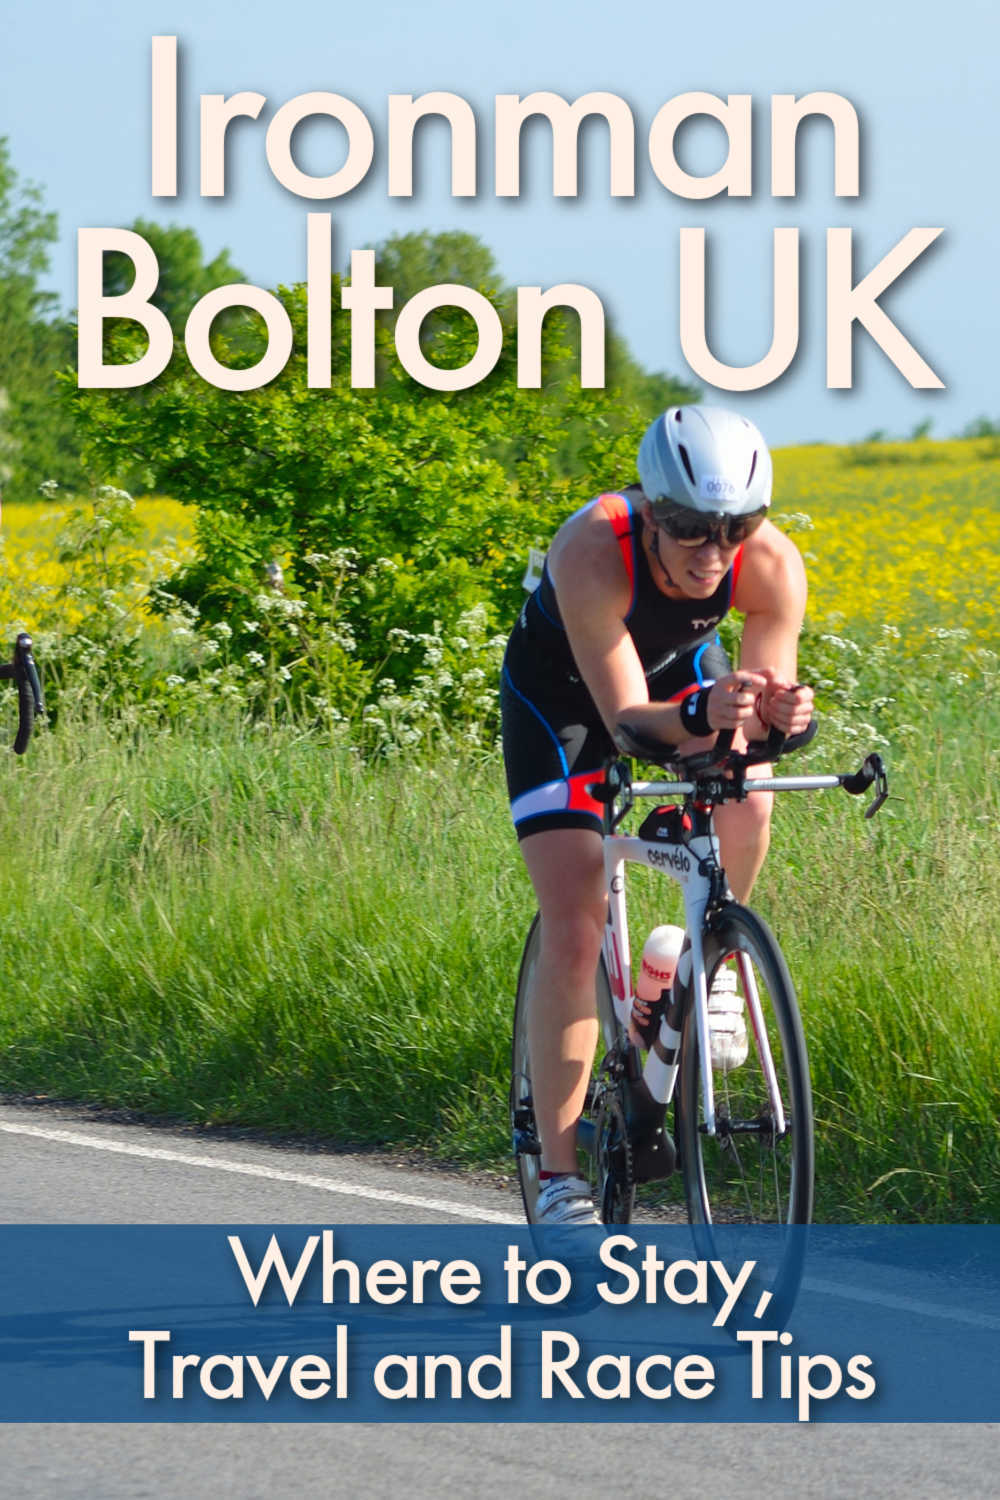 Planning to participate in Ironman Bolton 2023? Discover the best Bolton hotels for Ironman and accommodation options for the ultimate UK triathlon experience. From cozy hotels to apartments in Bolton, we've got you covered. Plus, information about the race, tips to plan your trip to Bolton, UK, and more. Bolton England | Bolton triathlon | UK Ironman |